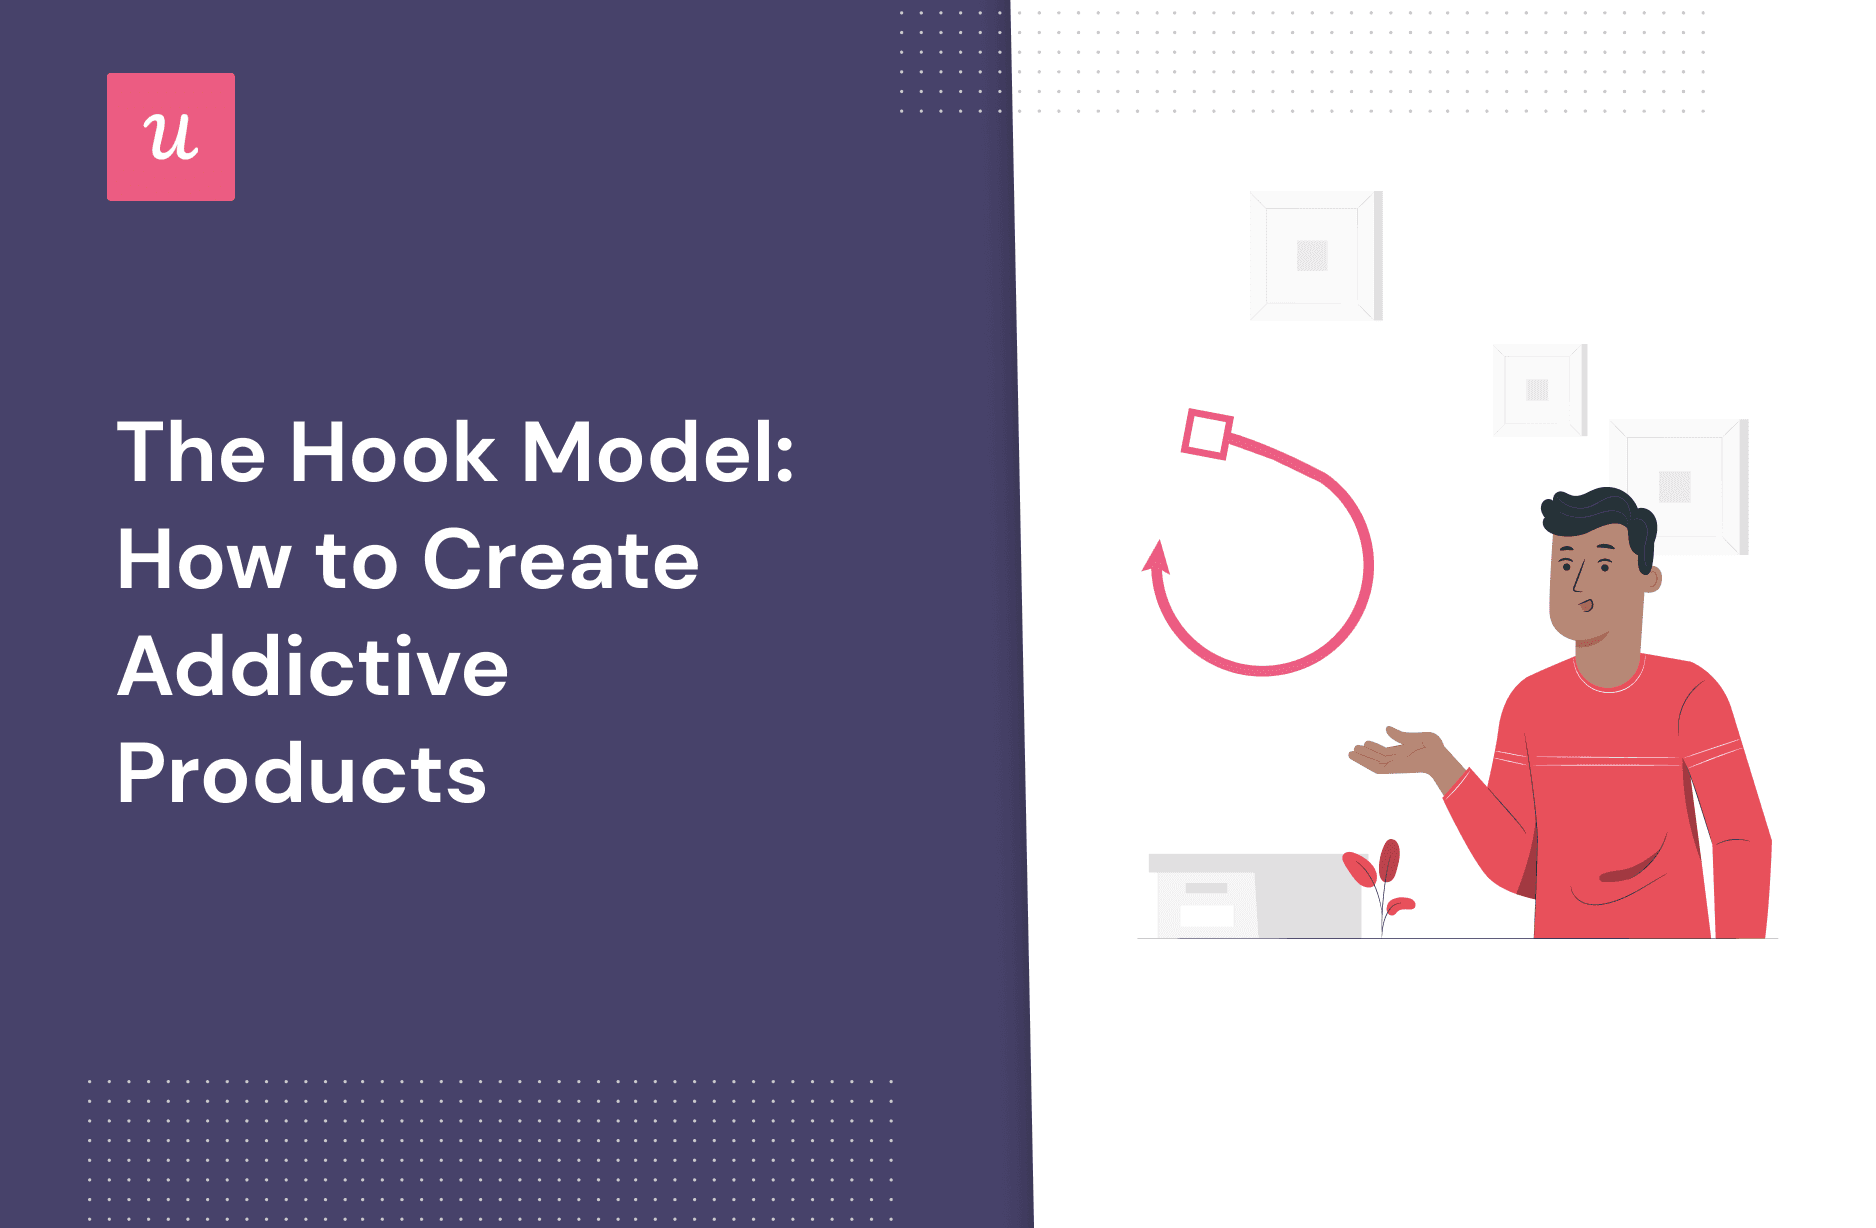 The Hook Model: How to Create Addictive Products